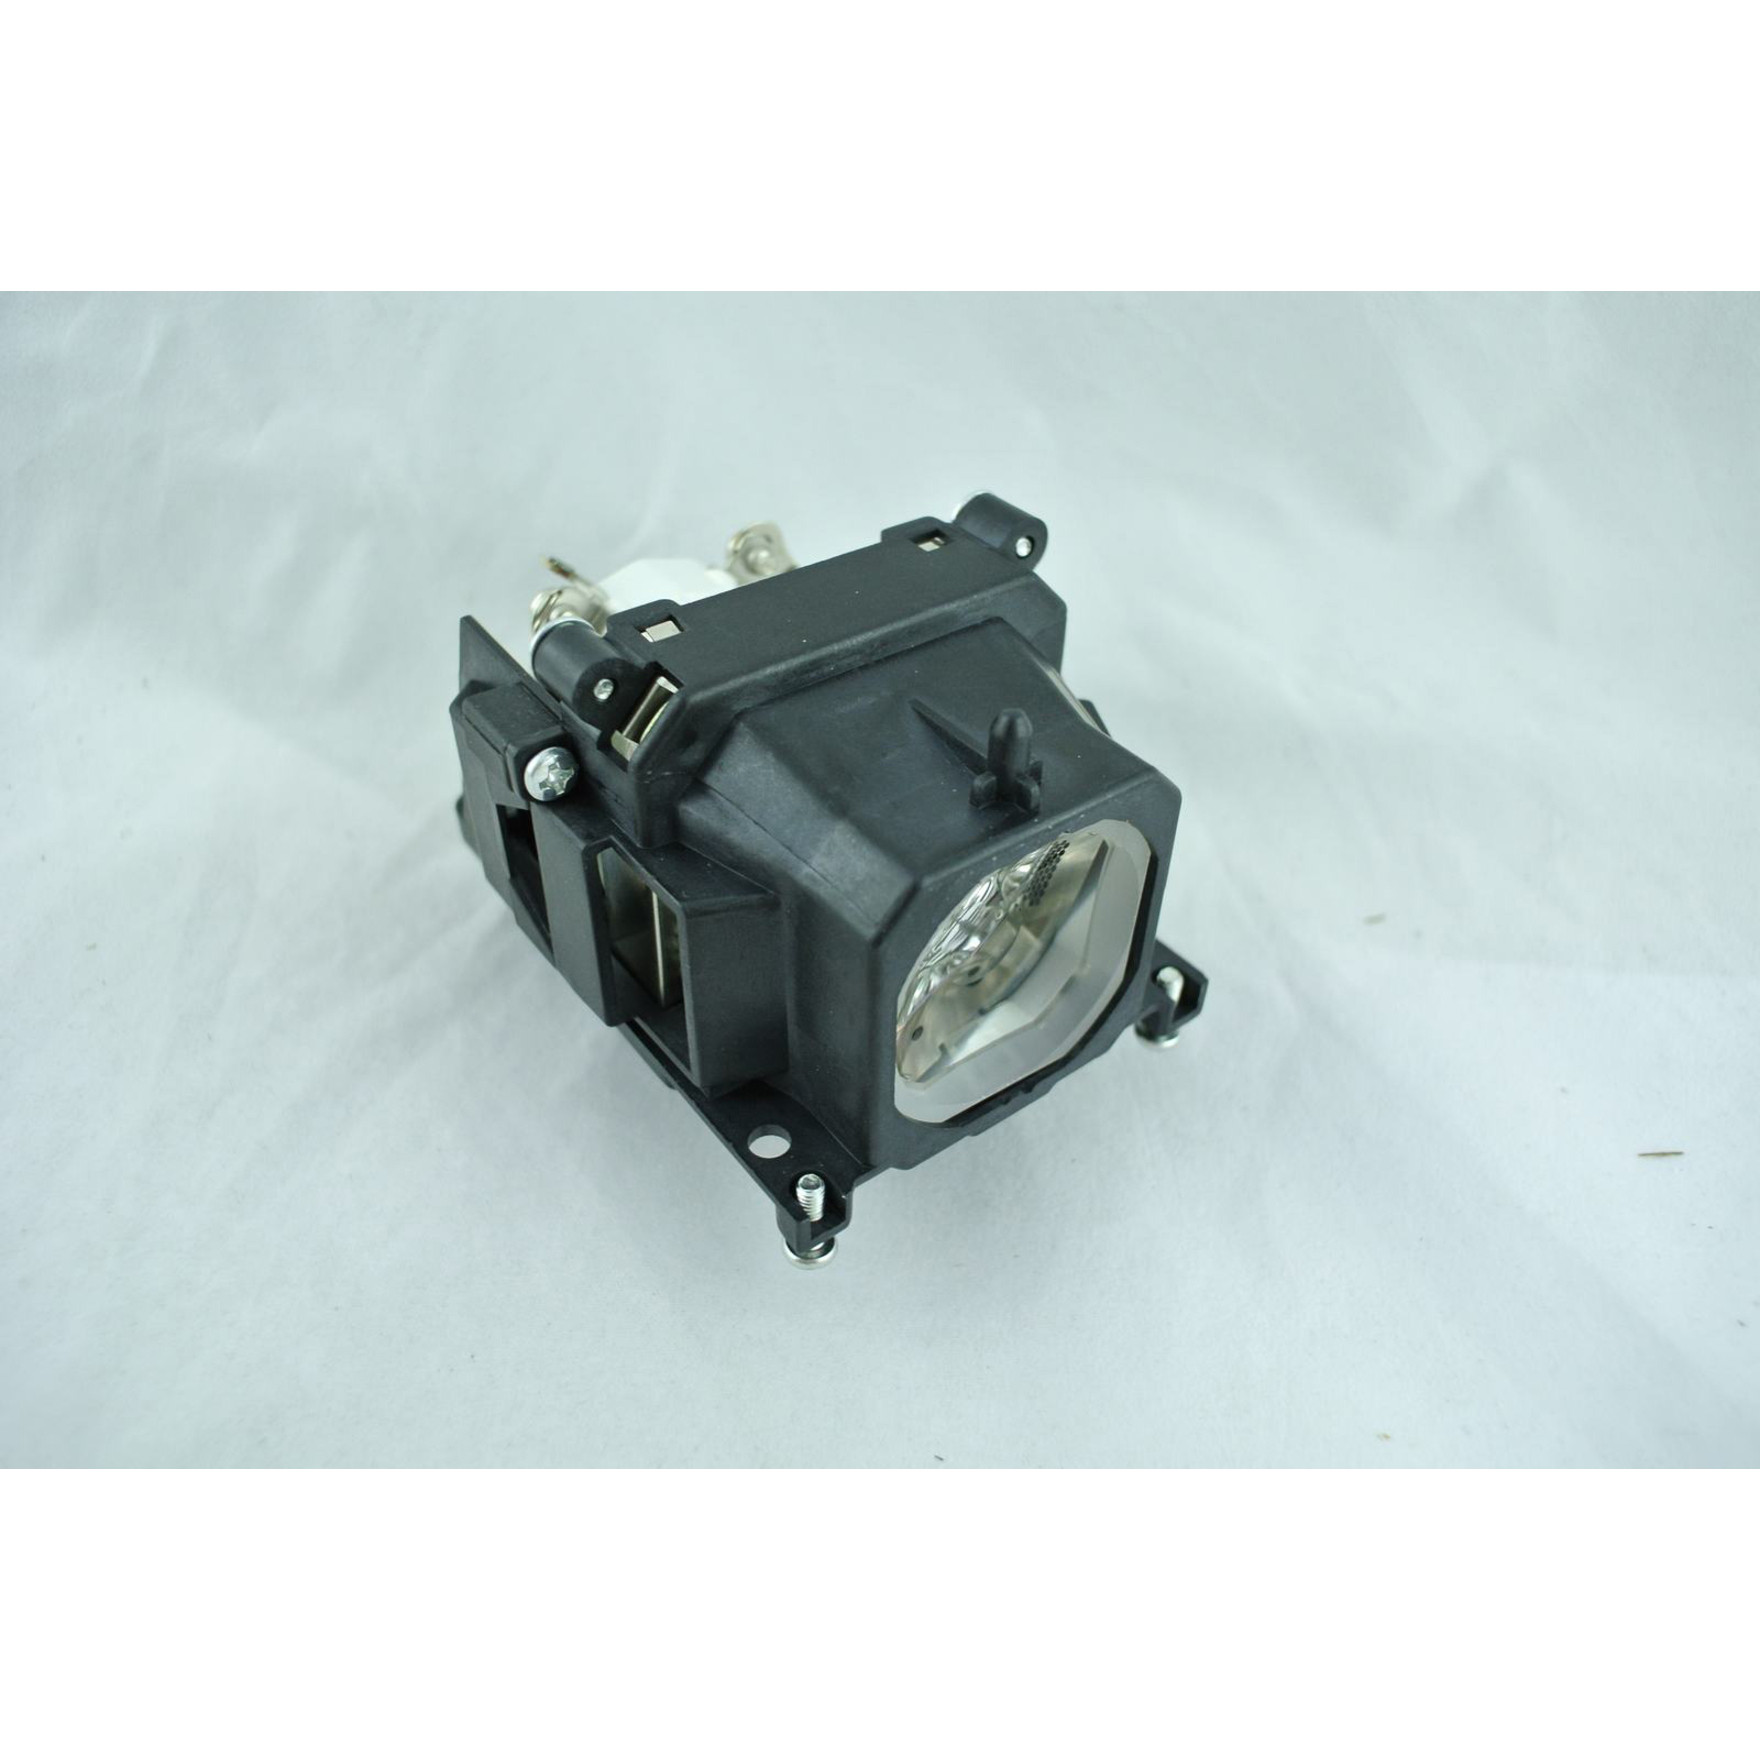 Battery Technology BTI Projector LampProjector Lamp ECO-930-BTI